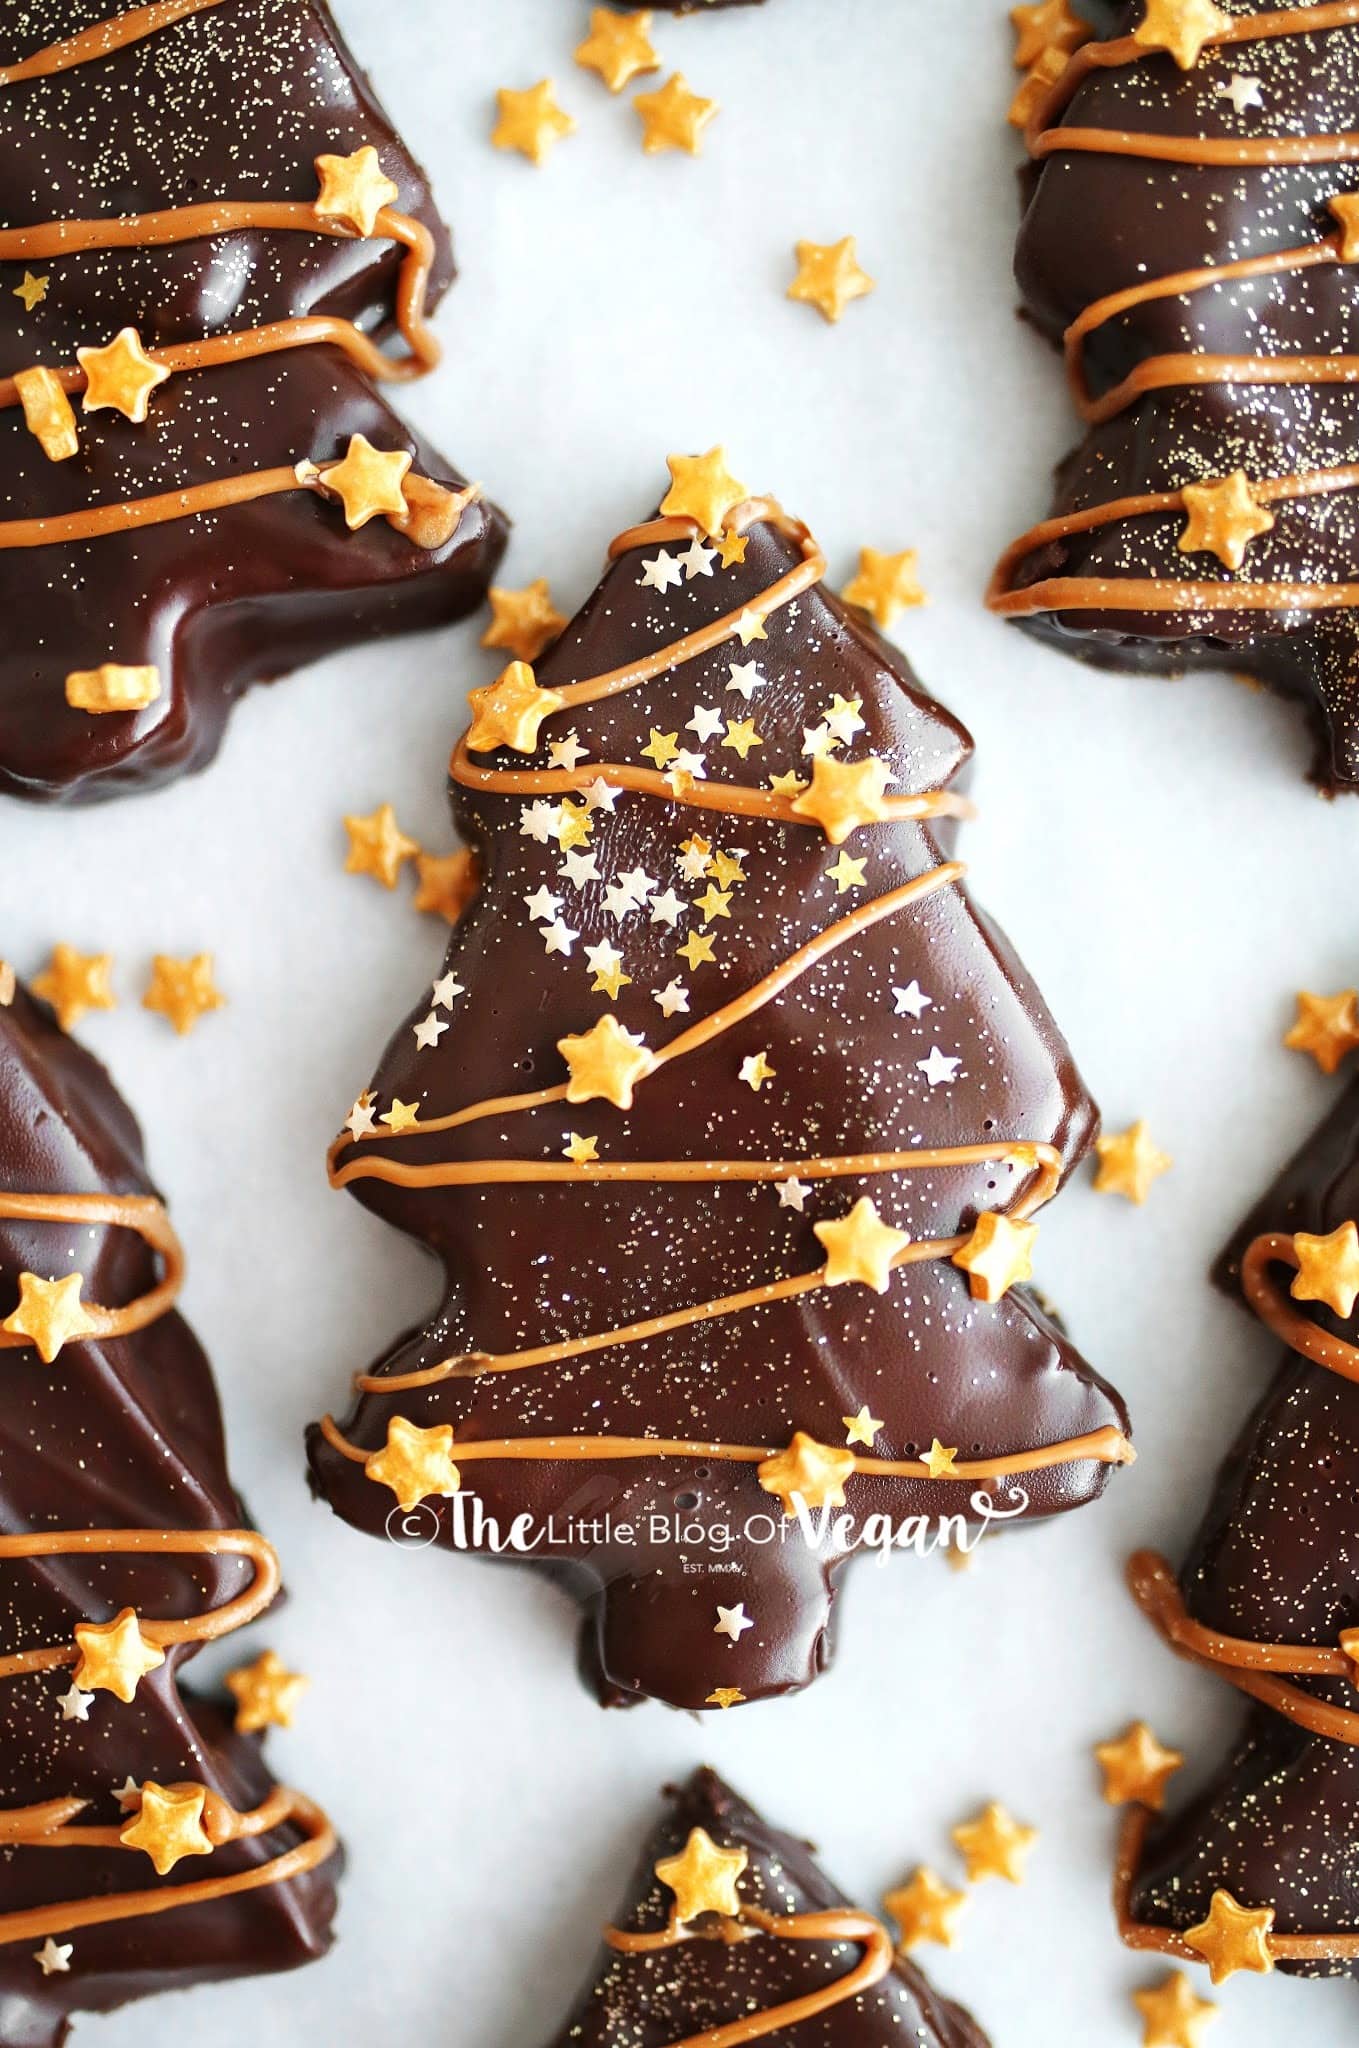 Christmas tree shaped brownies coated in chocolate decorated with drizzle of caramel syrup and star candies garnish. 